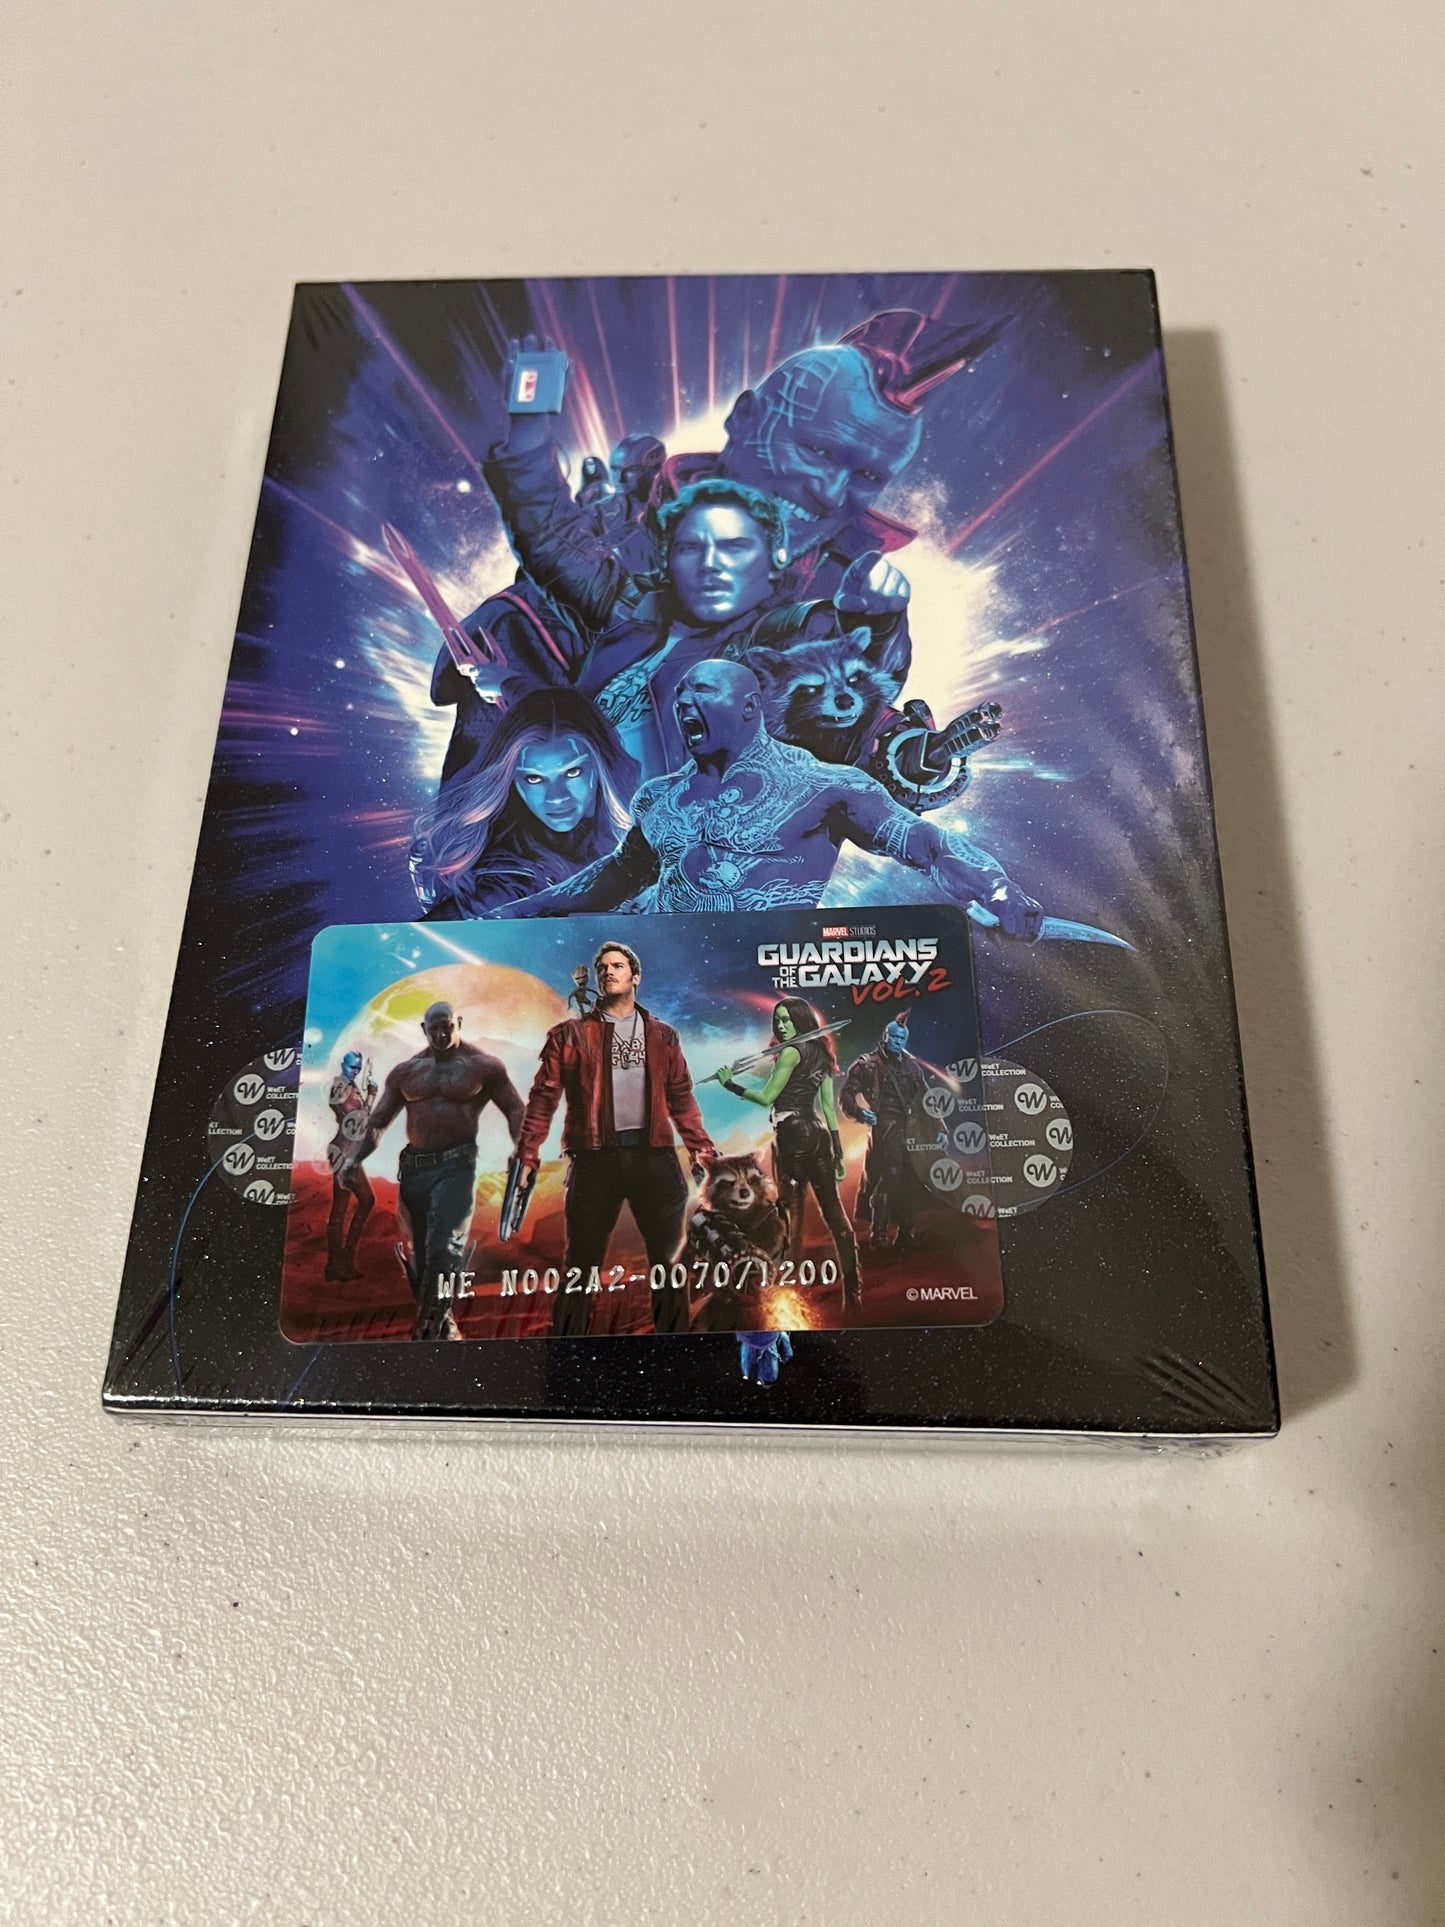 Guardians of the Galaxy Vol. 2 (3D+2D Blu-ray SteelBook) (WeET Collection Exclusive No. 02) Full Slip A2